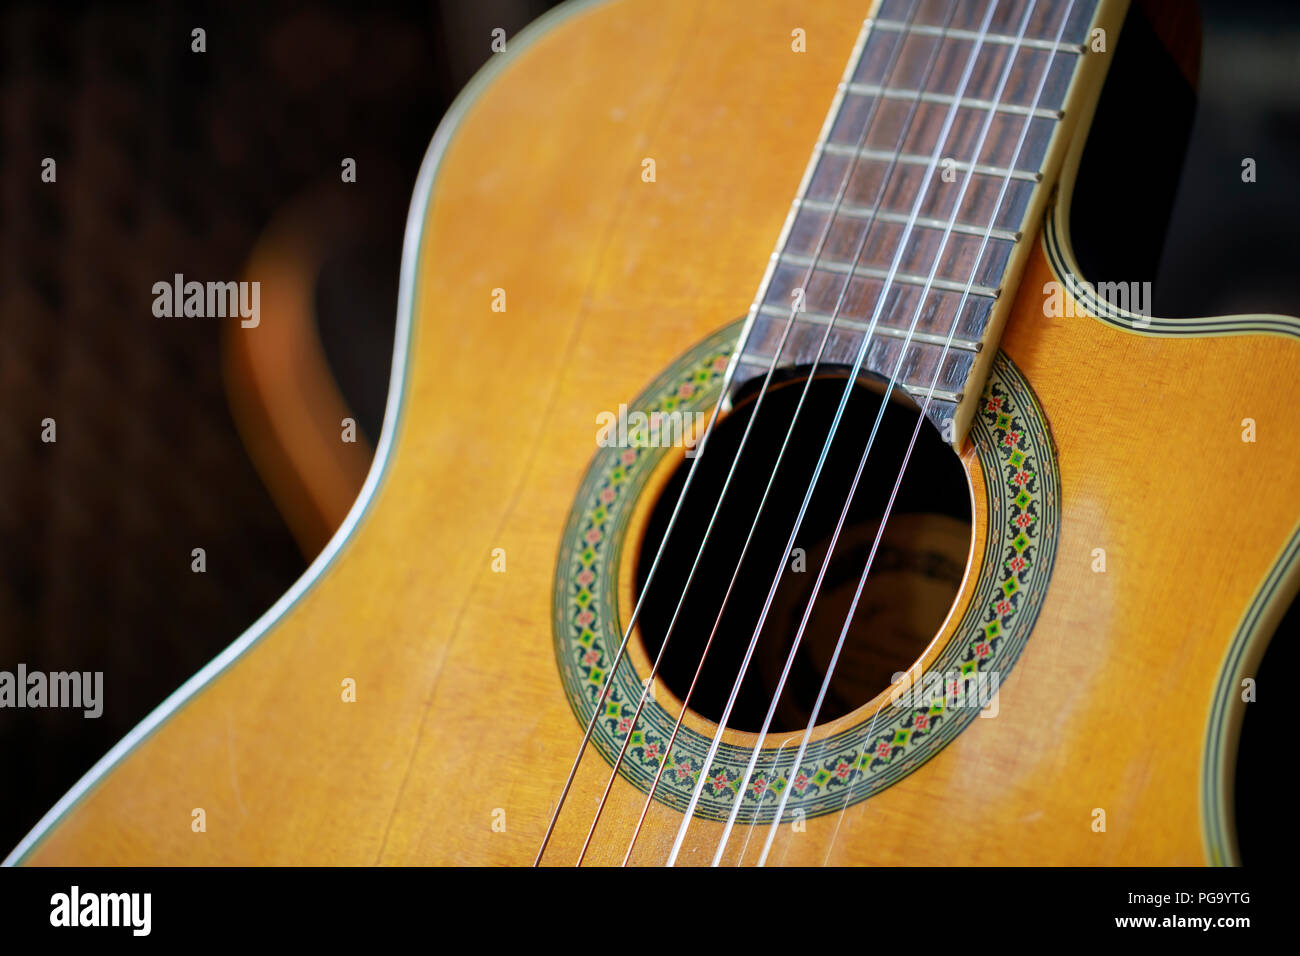 Acoustic guitar sound hole with strings Stock Photo